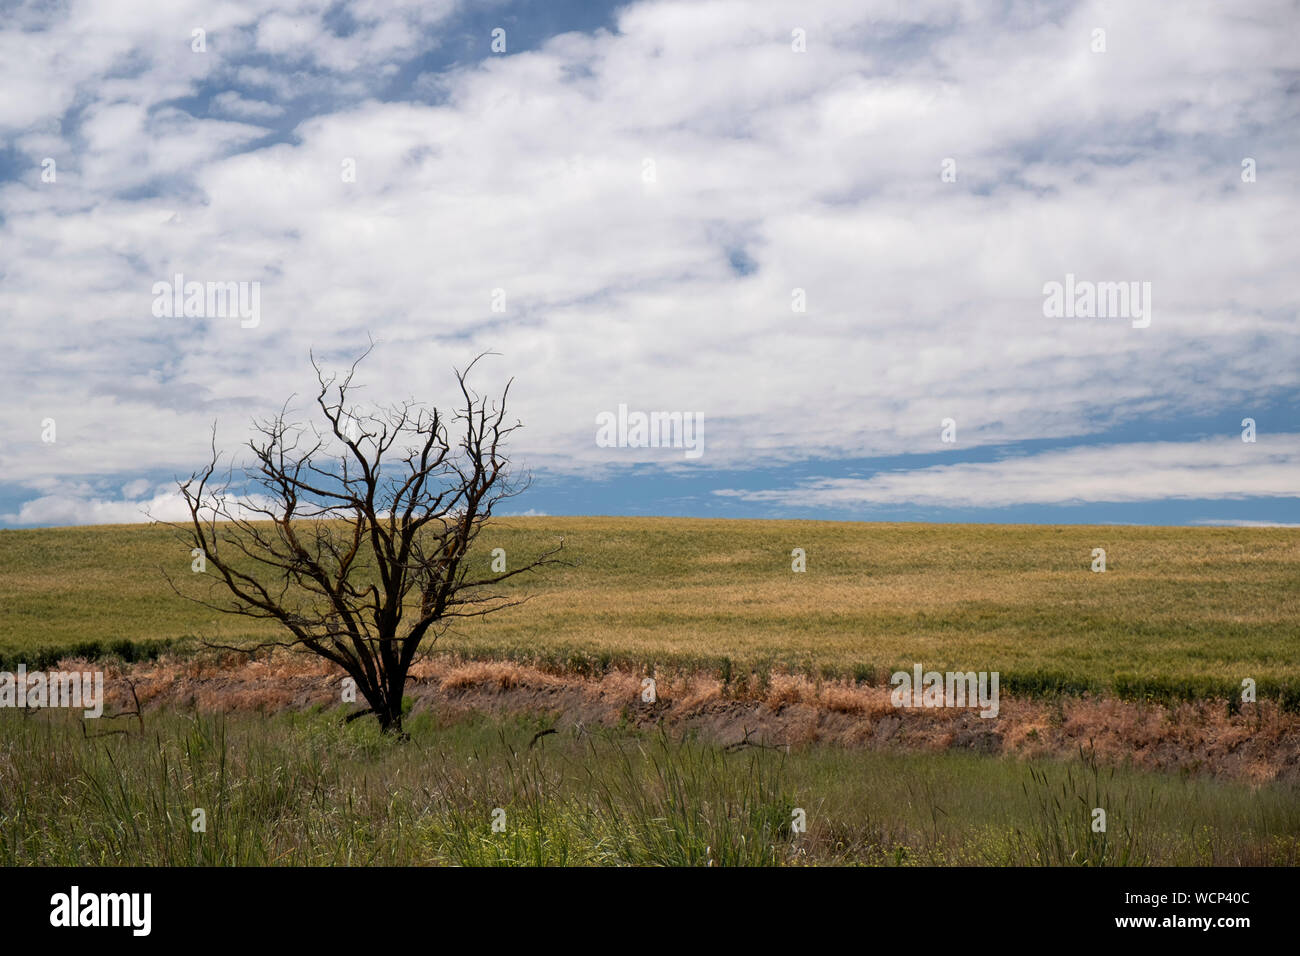 Central Oregon Wheat Country Stock Photo